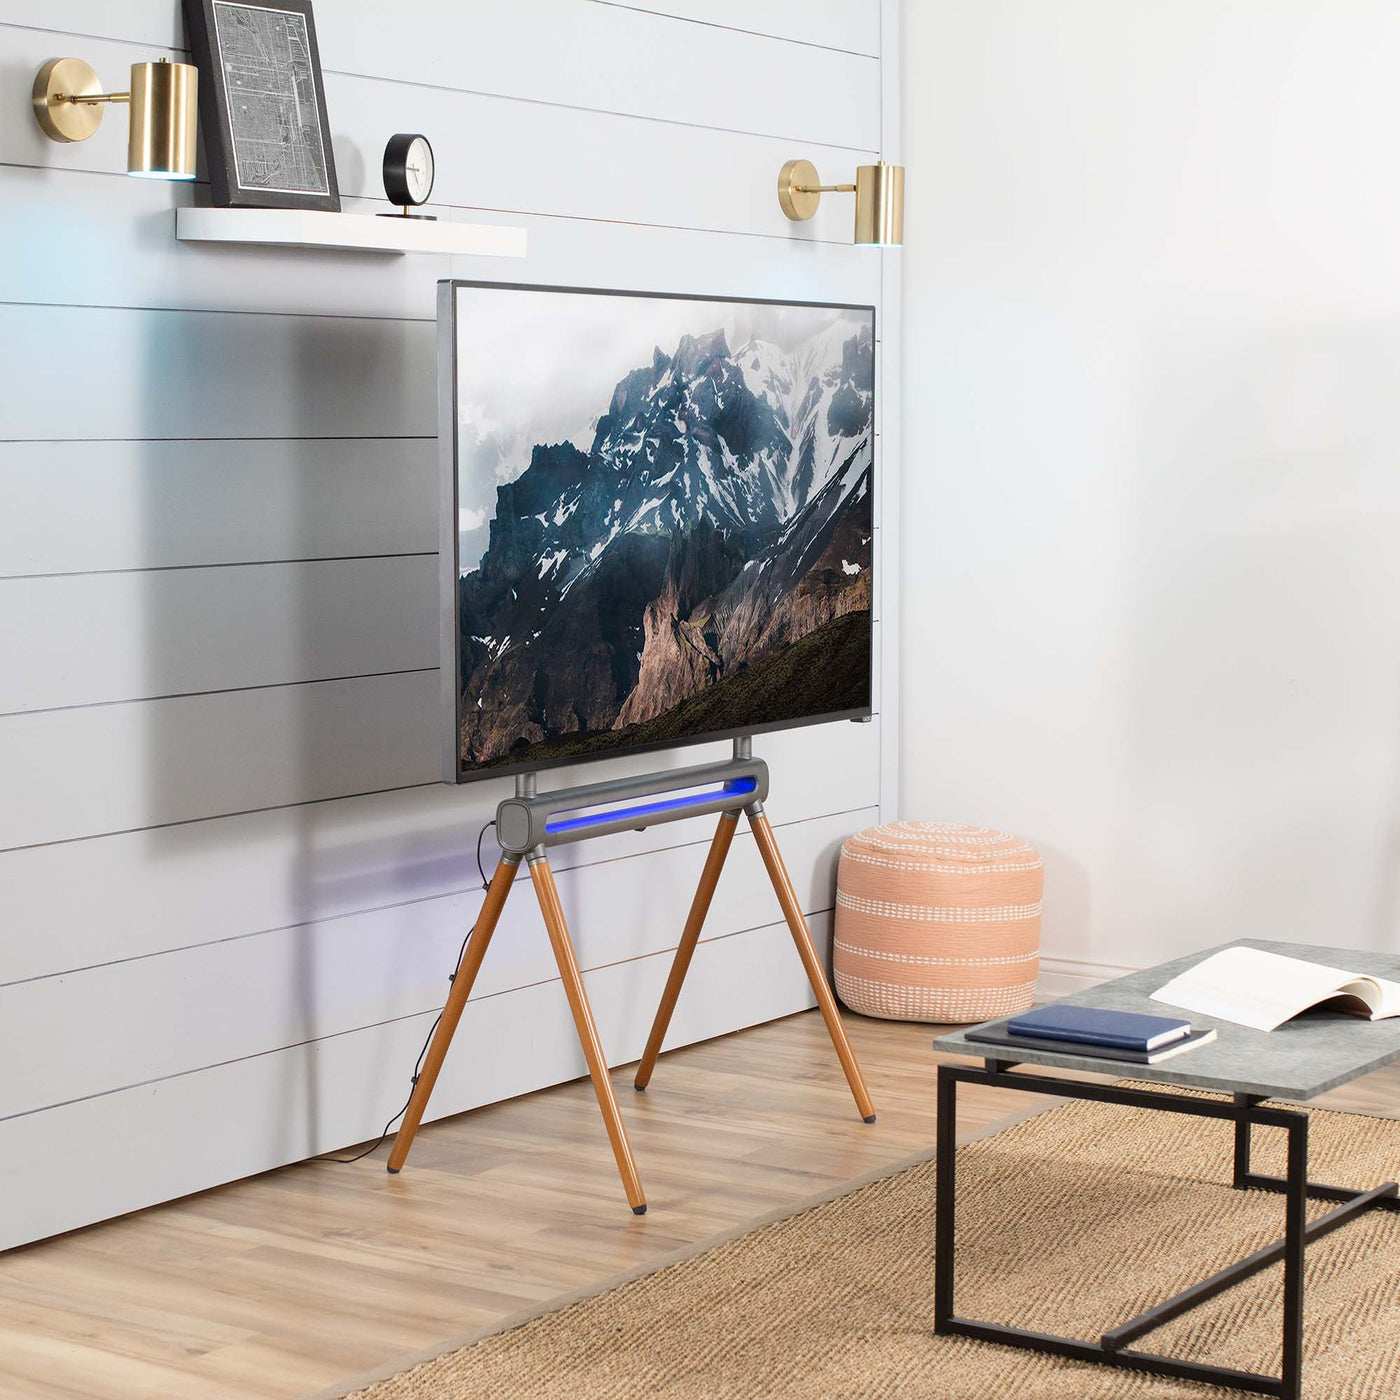 Sturdy easel studio TV stand with remote control RGB lighting.